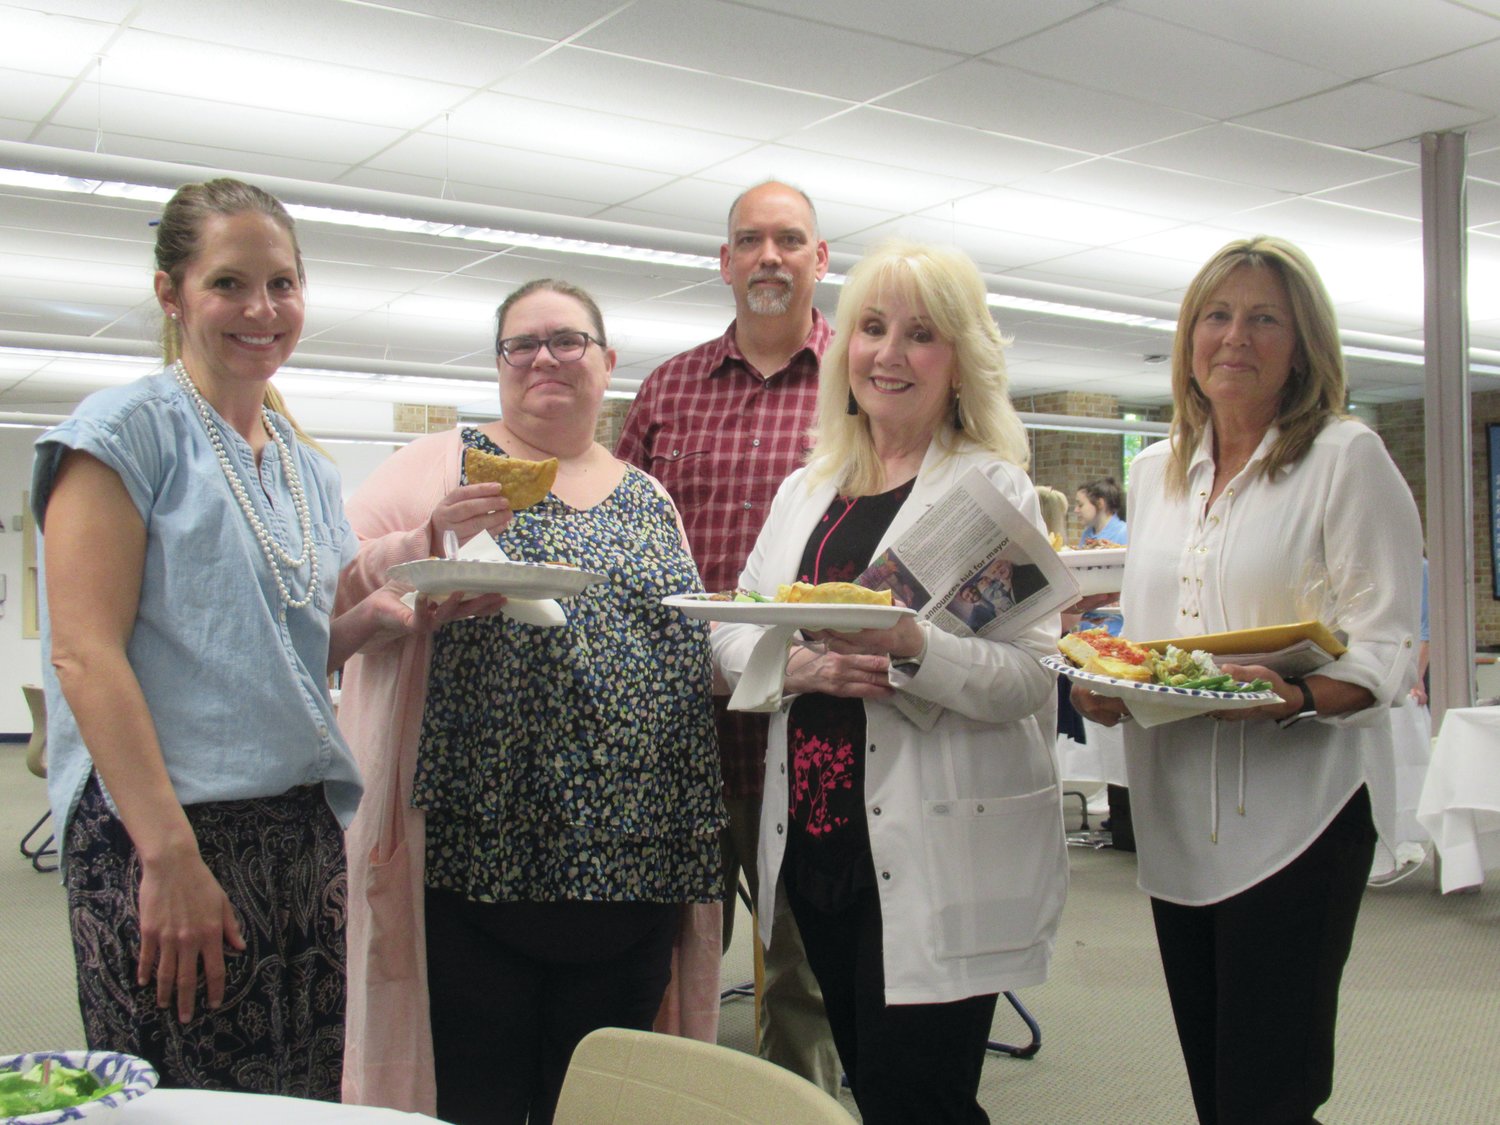 SPECIAL SERVINGS: JHS faculty members Terri Florio, Kassie Kerms, Tim Stahl, Alberta Procaccini and Pat Cardillo show off their plates of “fantastic foods” they enjoyed during last week’s luncheon.